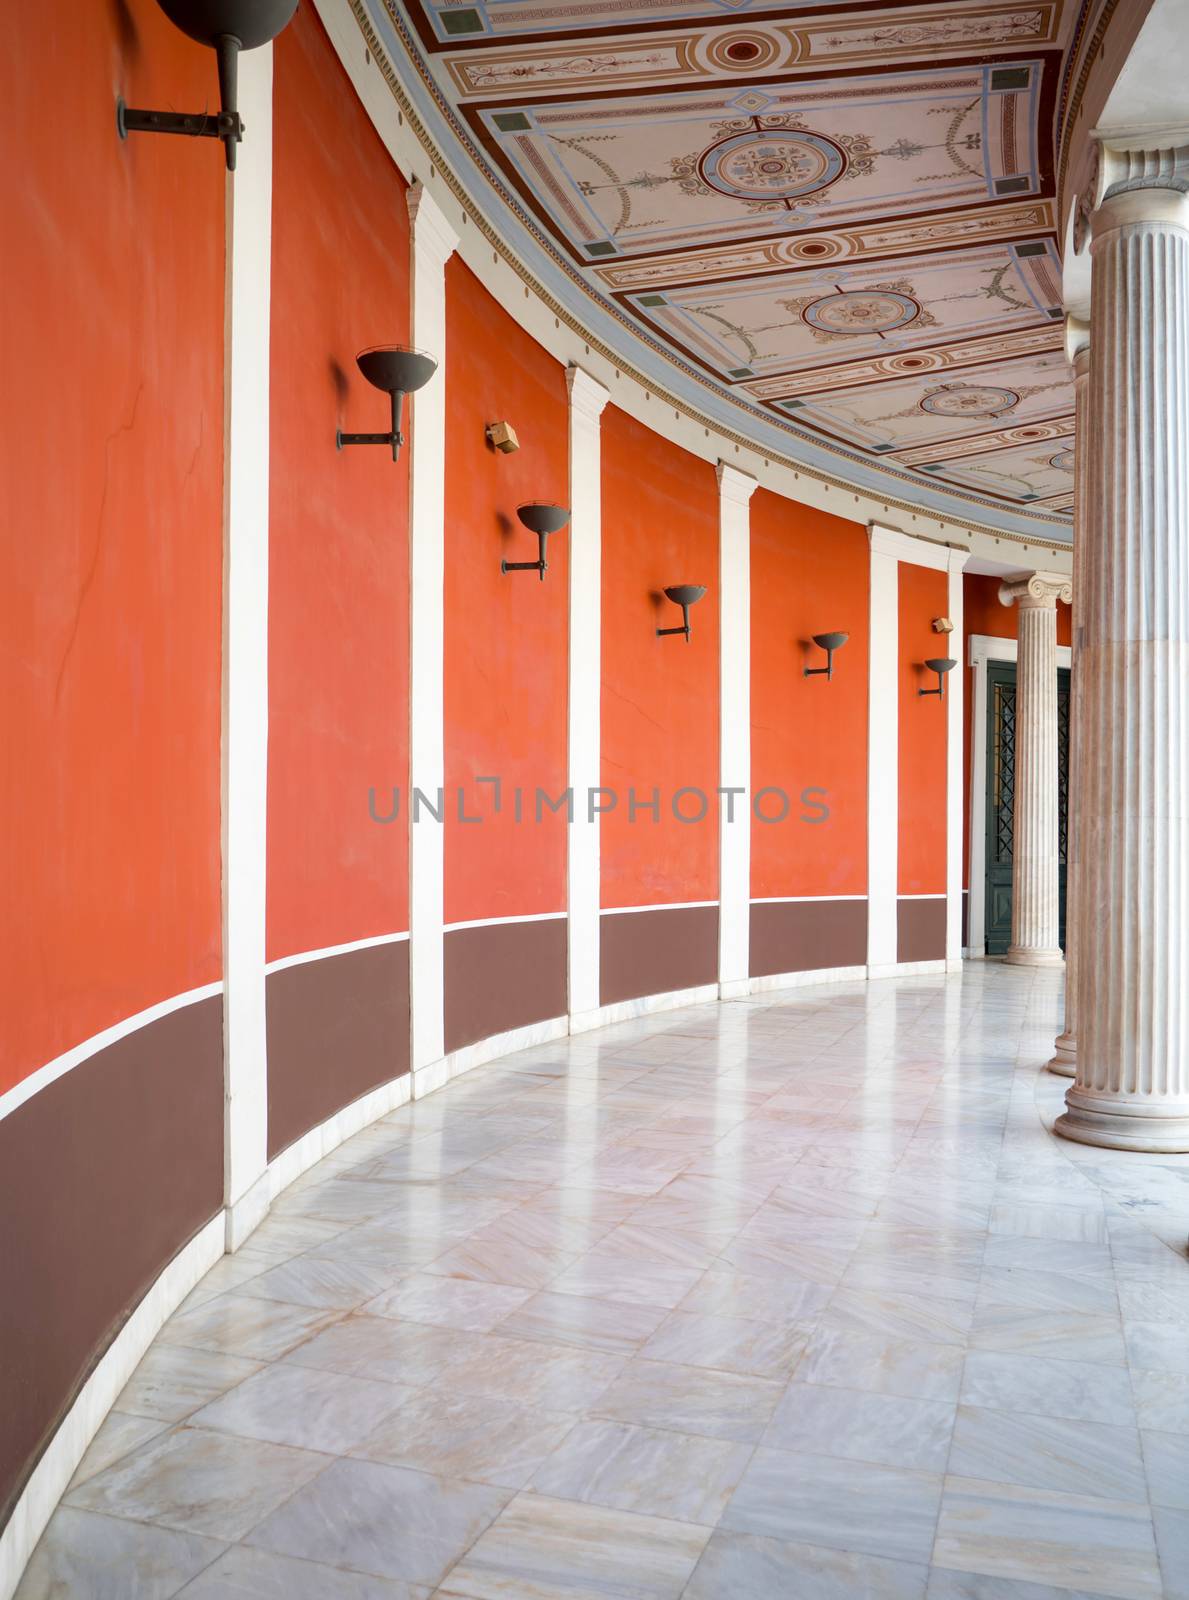 ATHENS, GREECE - APRIL 5,2016: The Zappeion Hall interior building with pillars